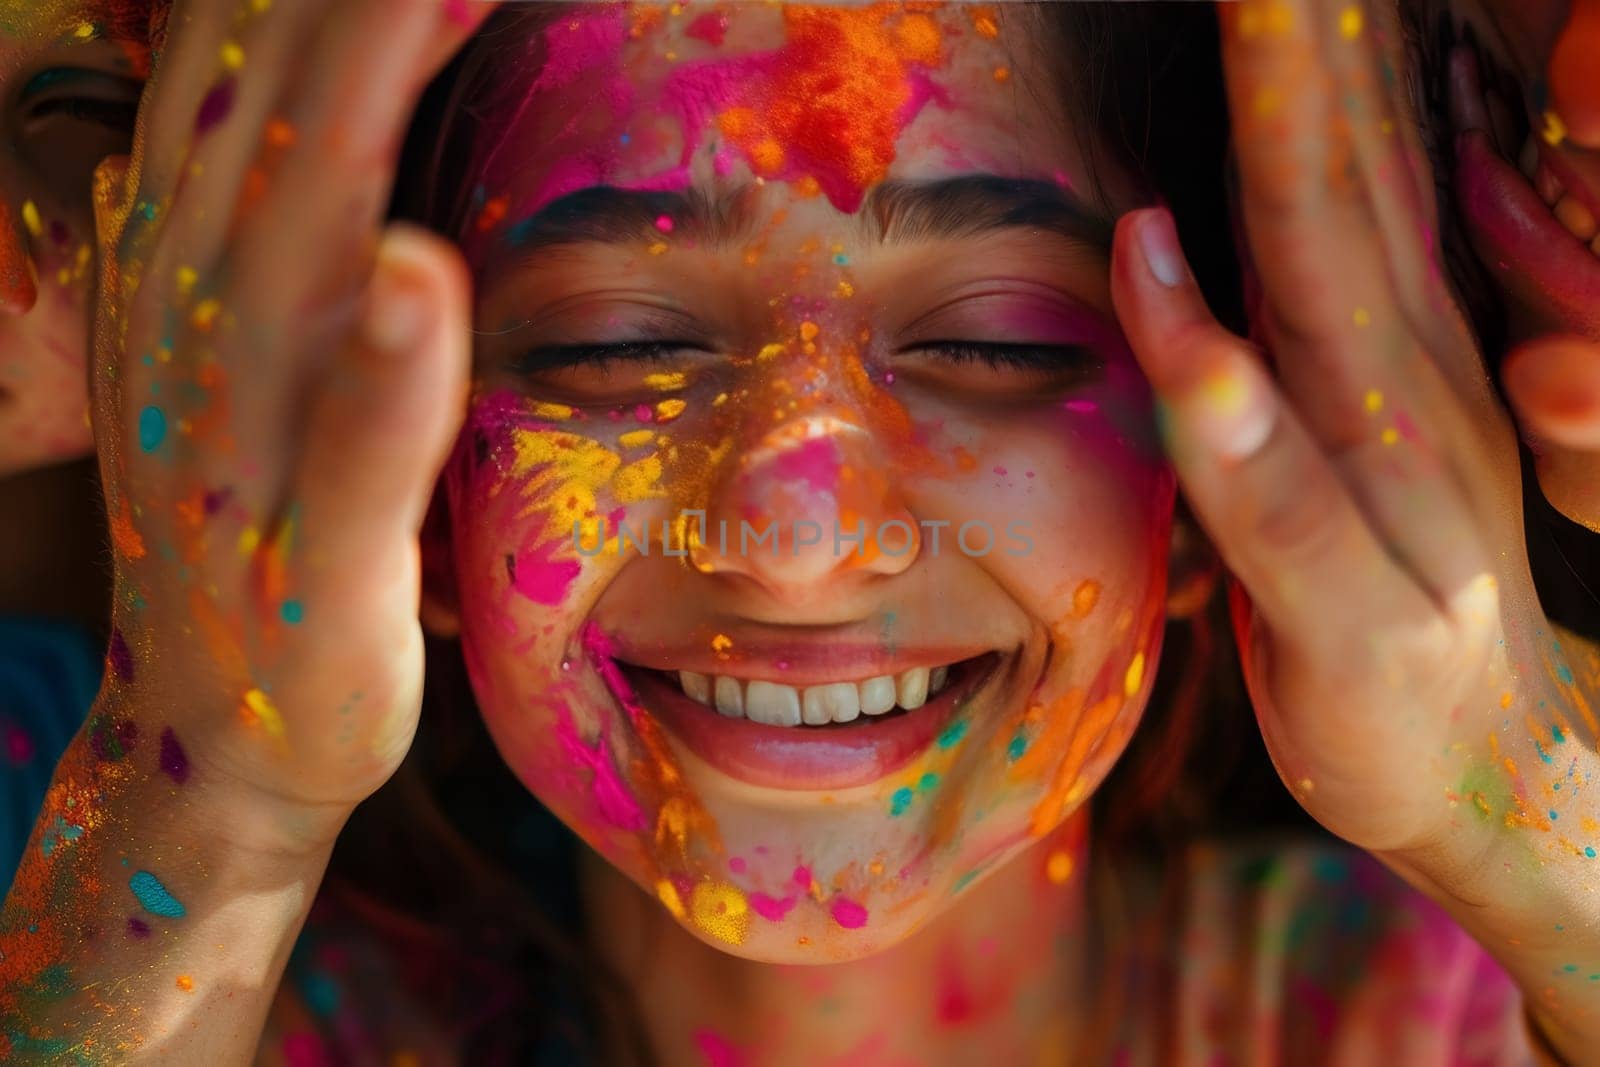 A young girl's face lights up with joy, smeared with vibrant colors during the Holi festival. This moment of pure happiness and cultural tradition shines through